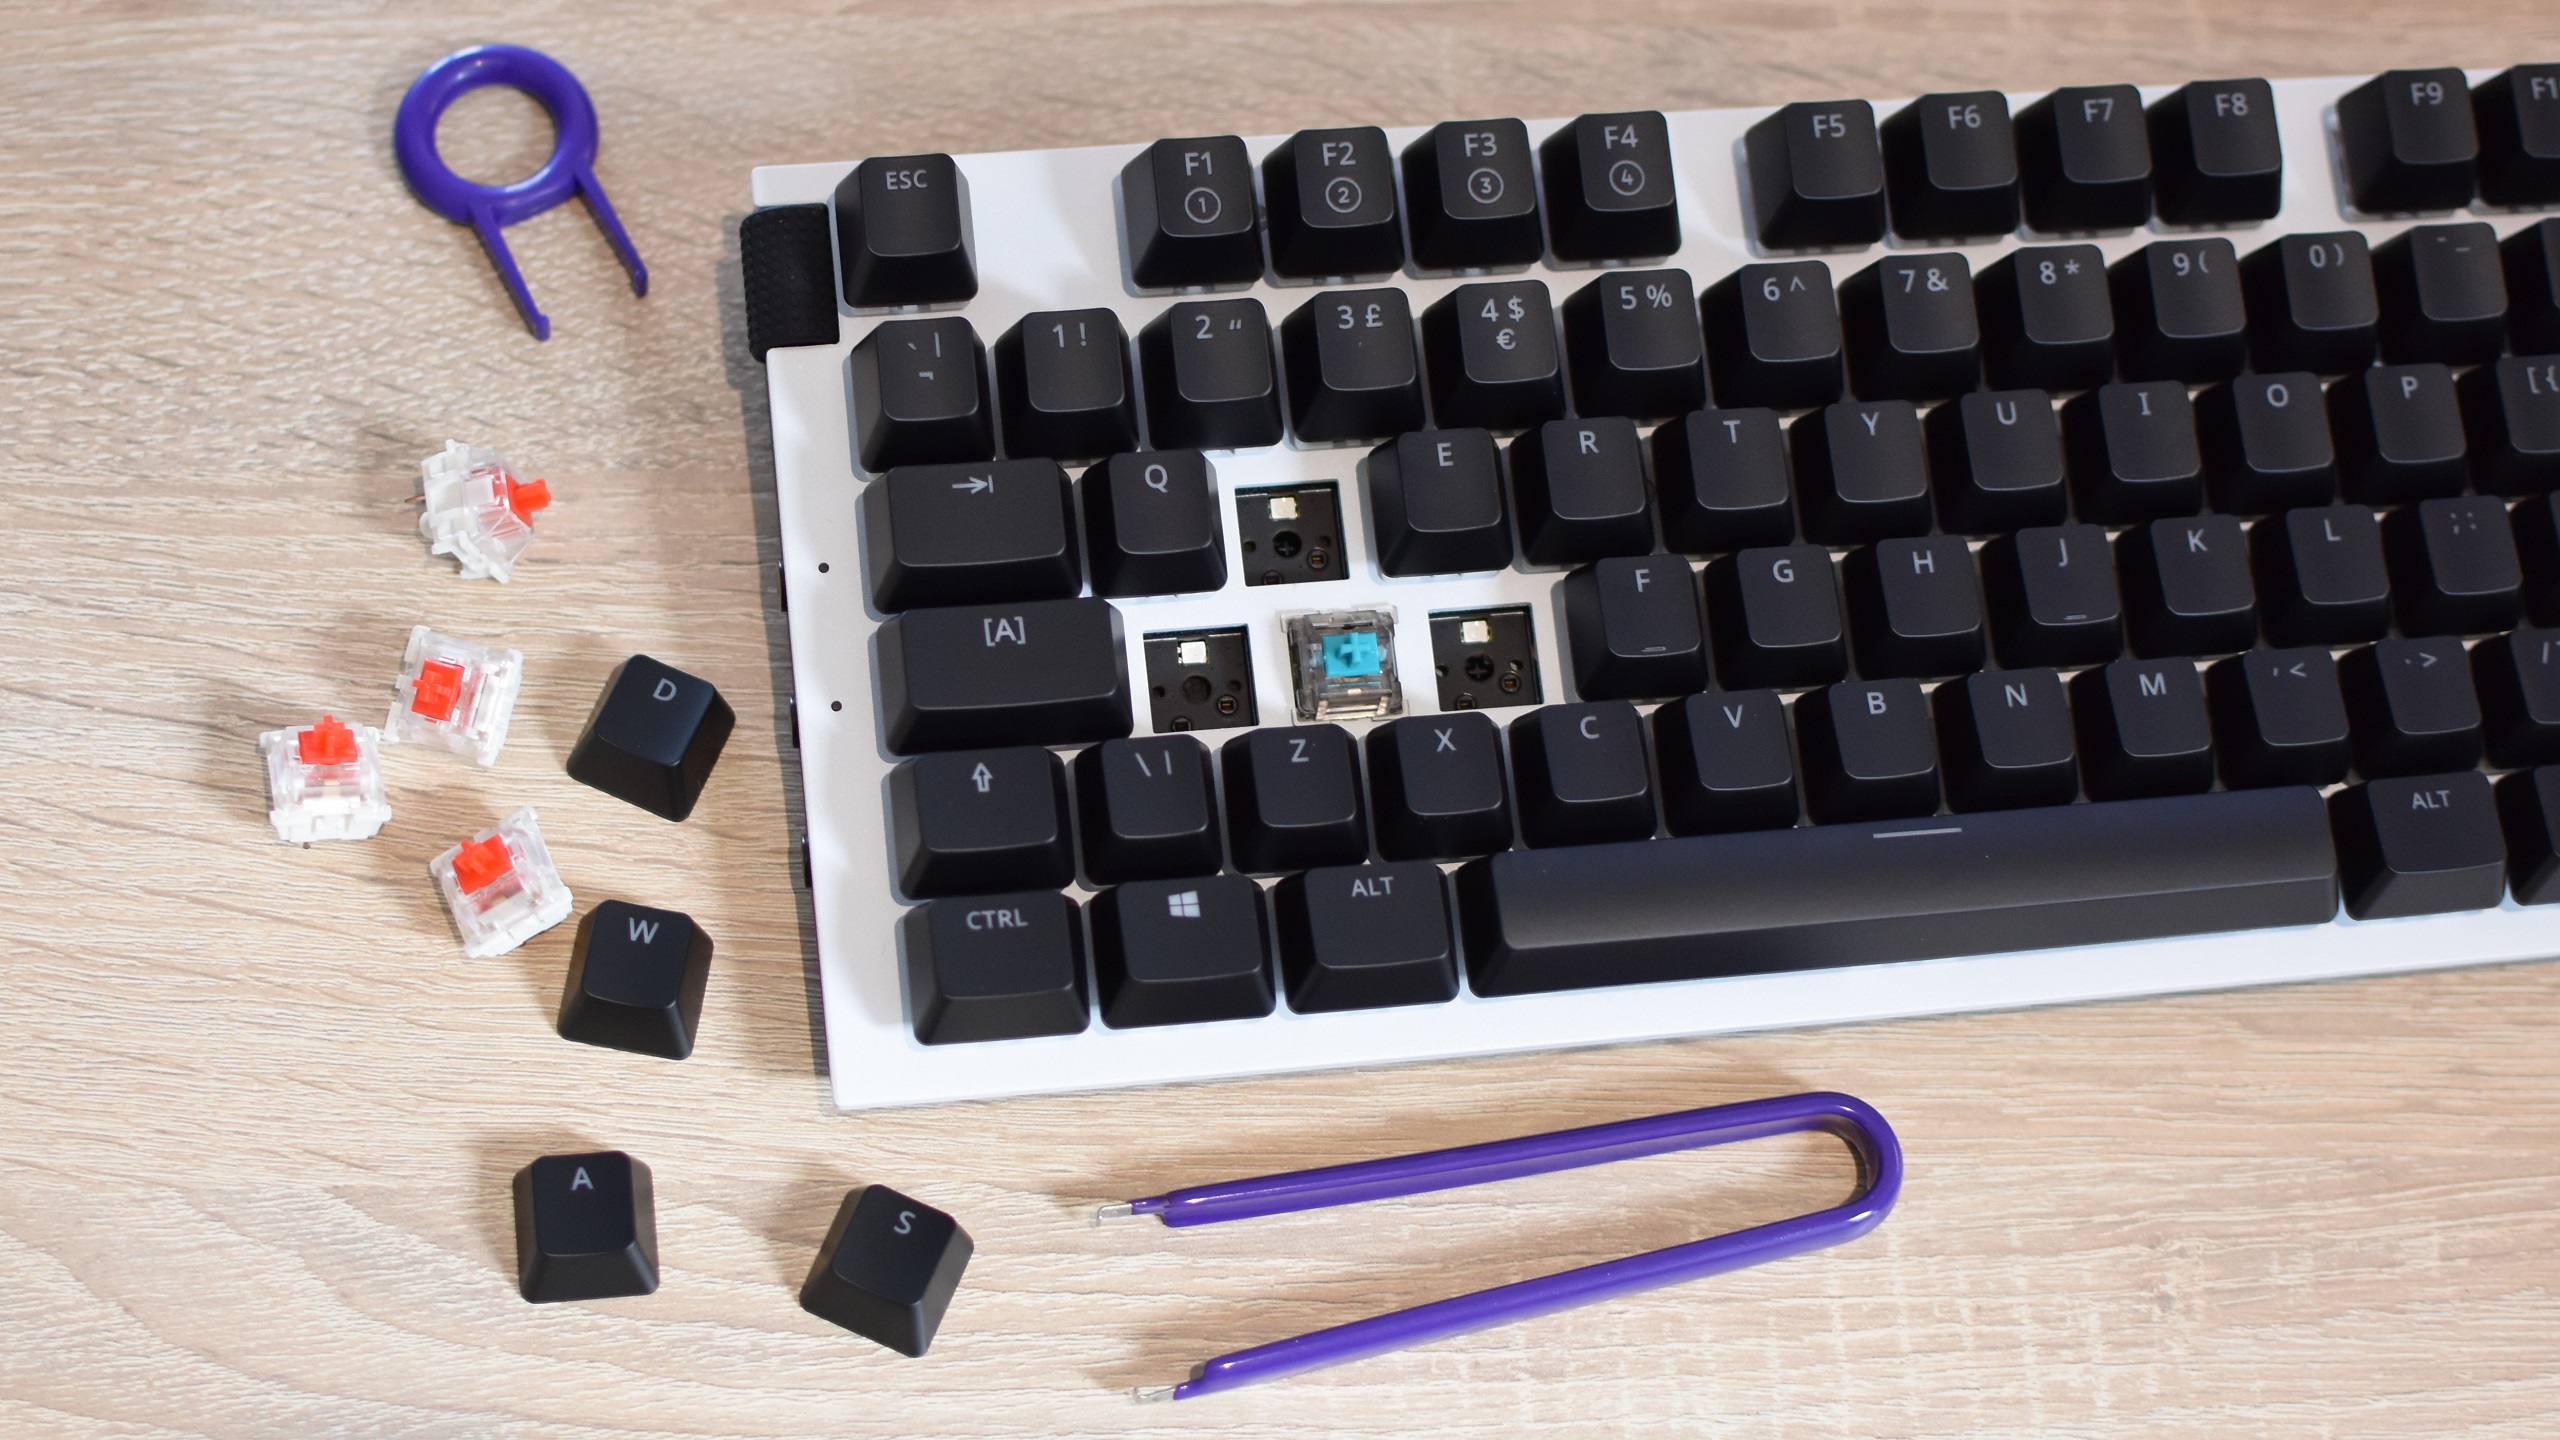 An NZXT Function gaming keyboard in the process of having its WASD key switches hot-swapped. Several removed keycaps and switches sit next to the keyboard, alongside some tools.